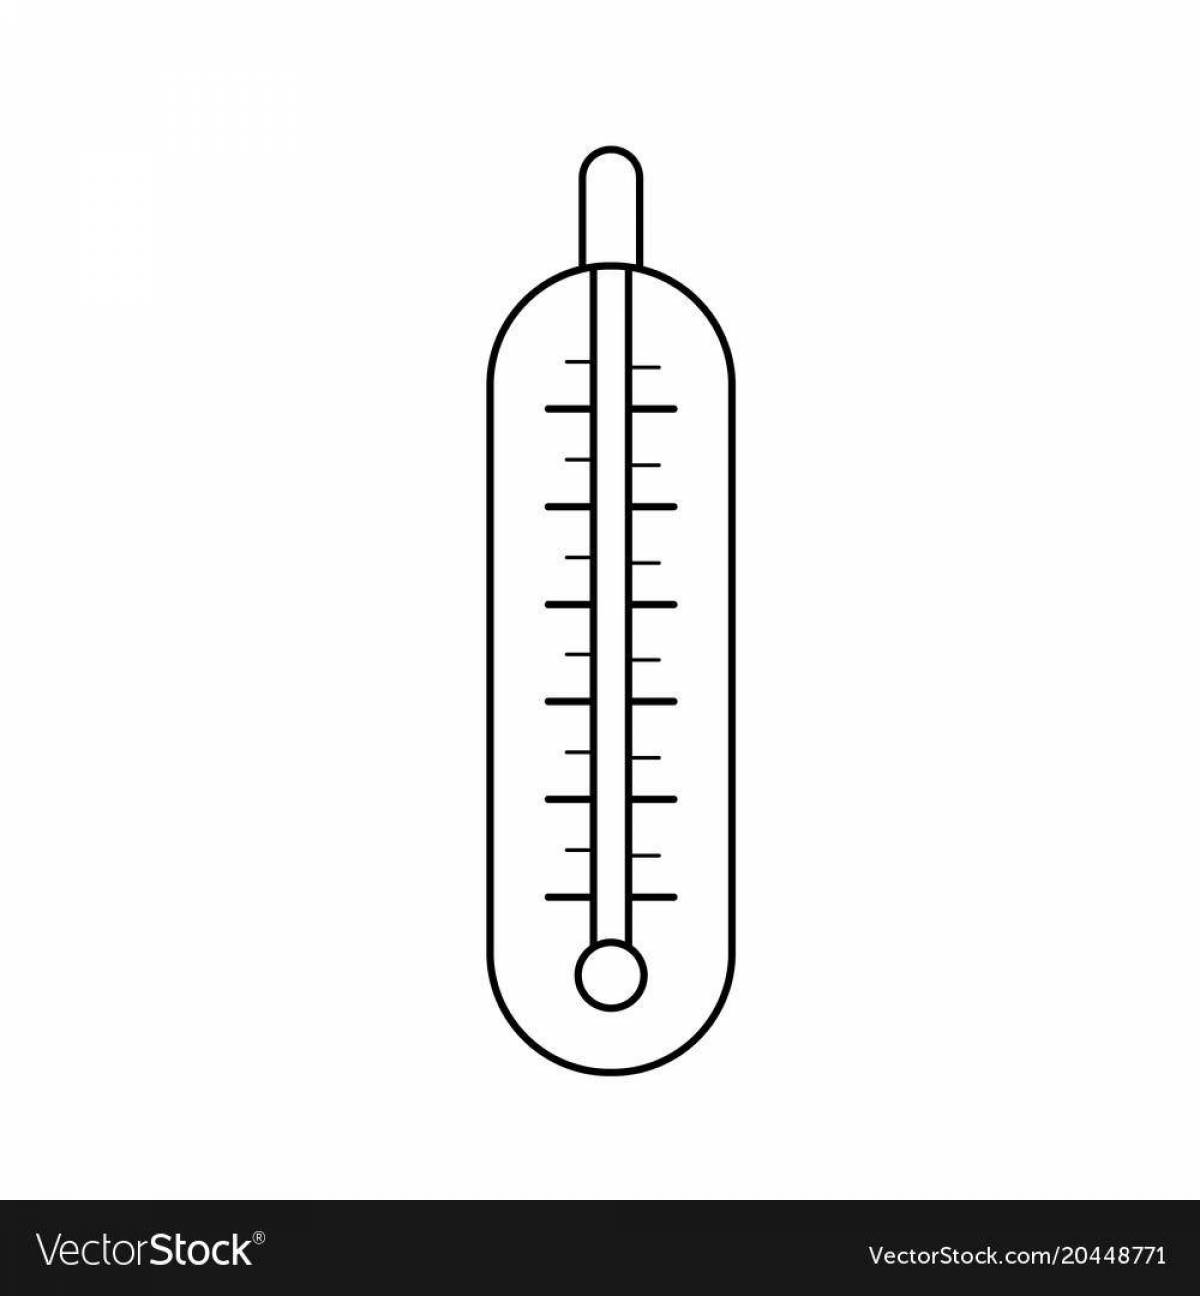 Colorful thermometer coloring for schoolchildren